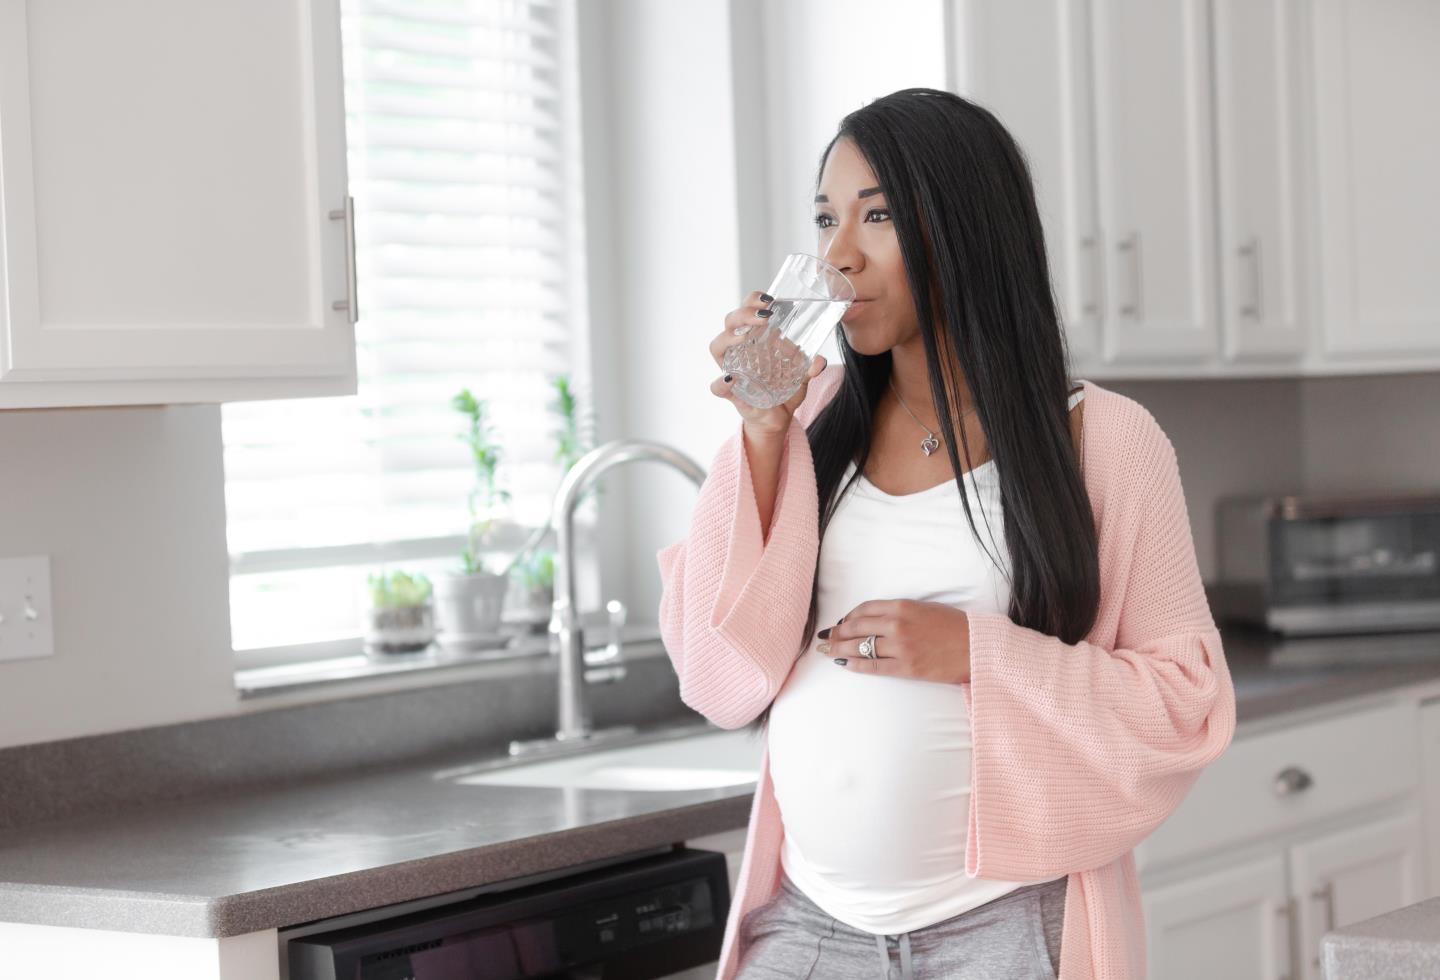 Pregnant woman drinking a glass of water by the sink 